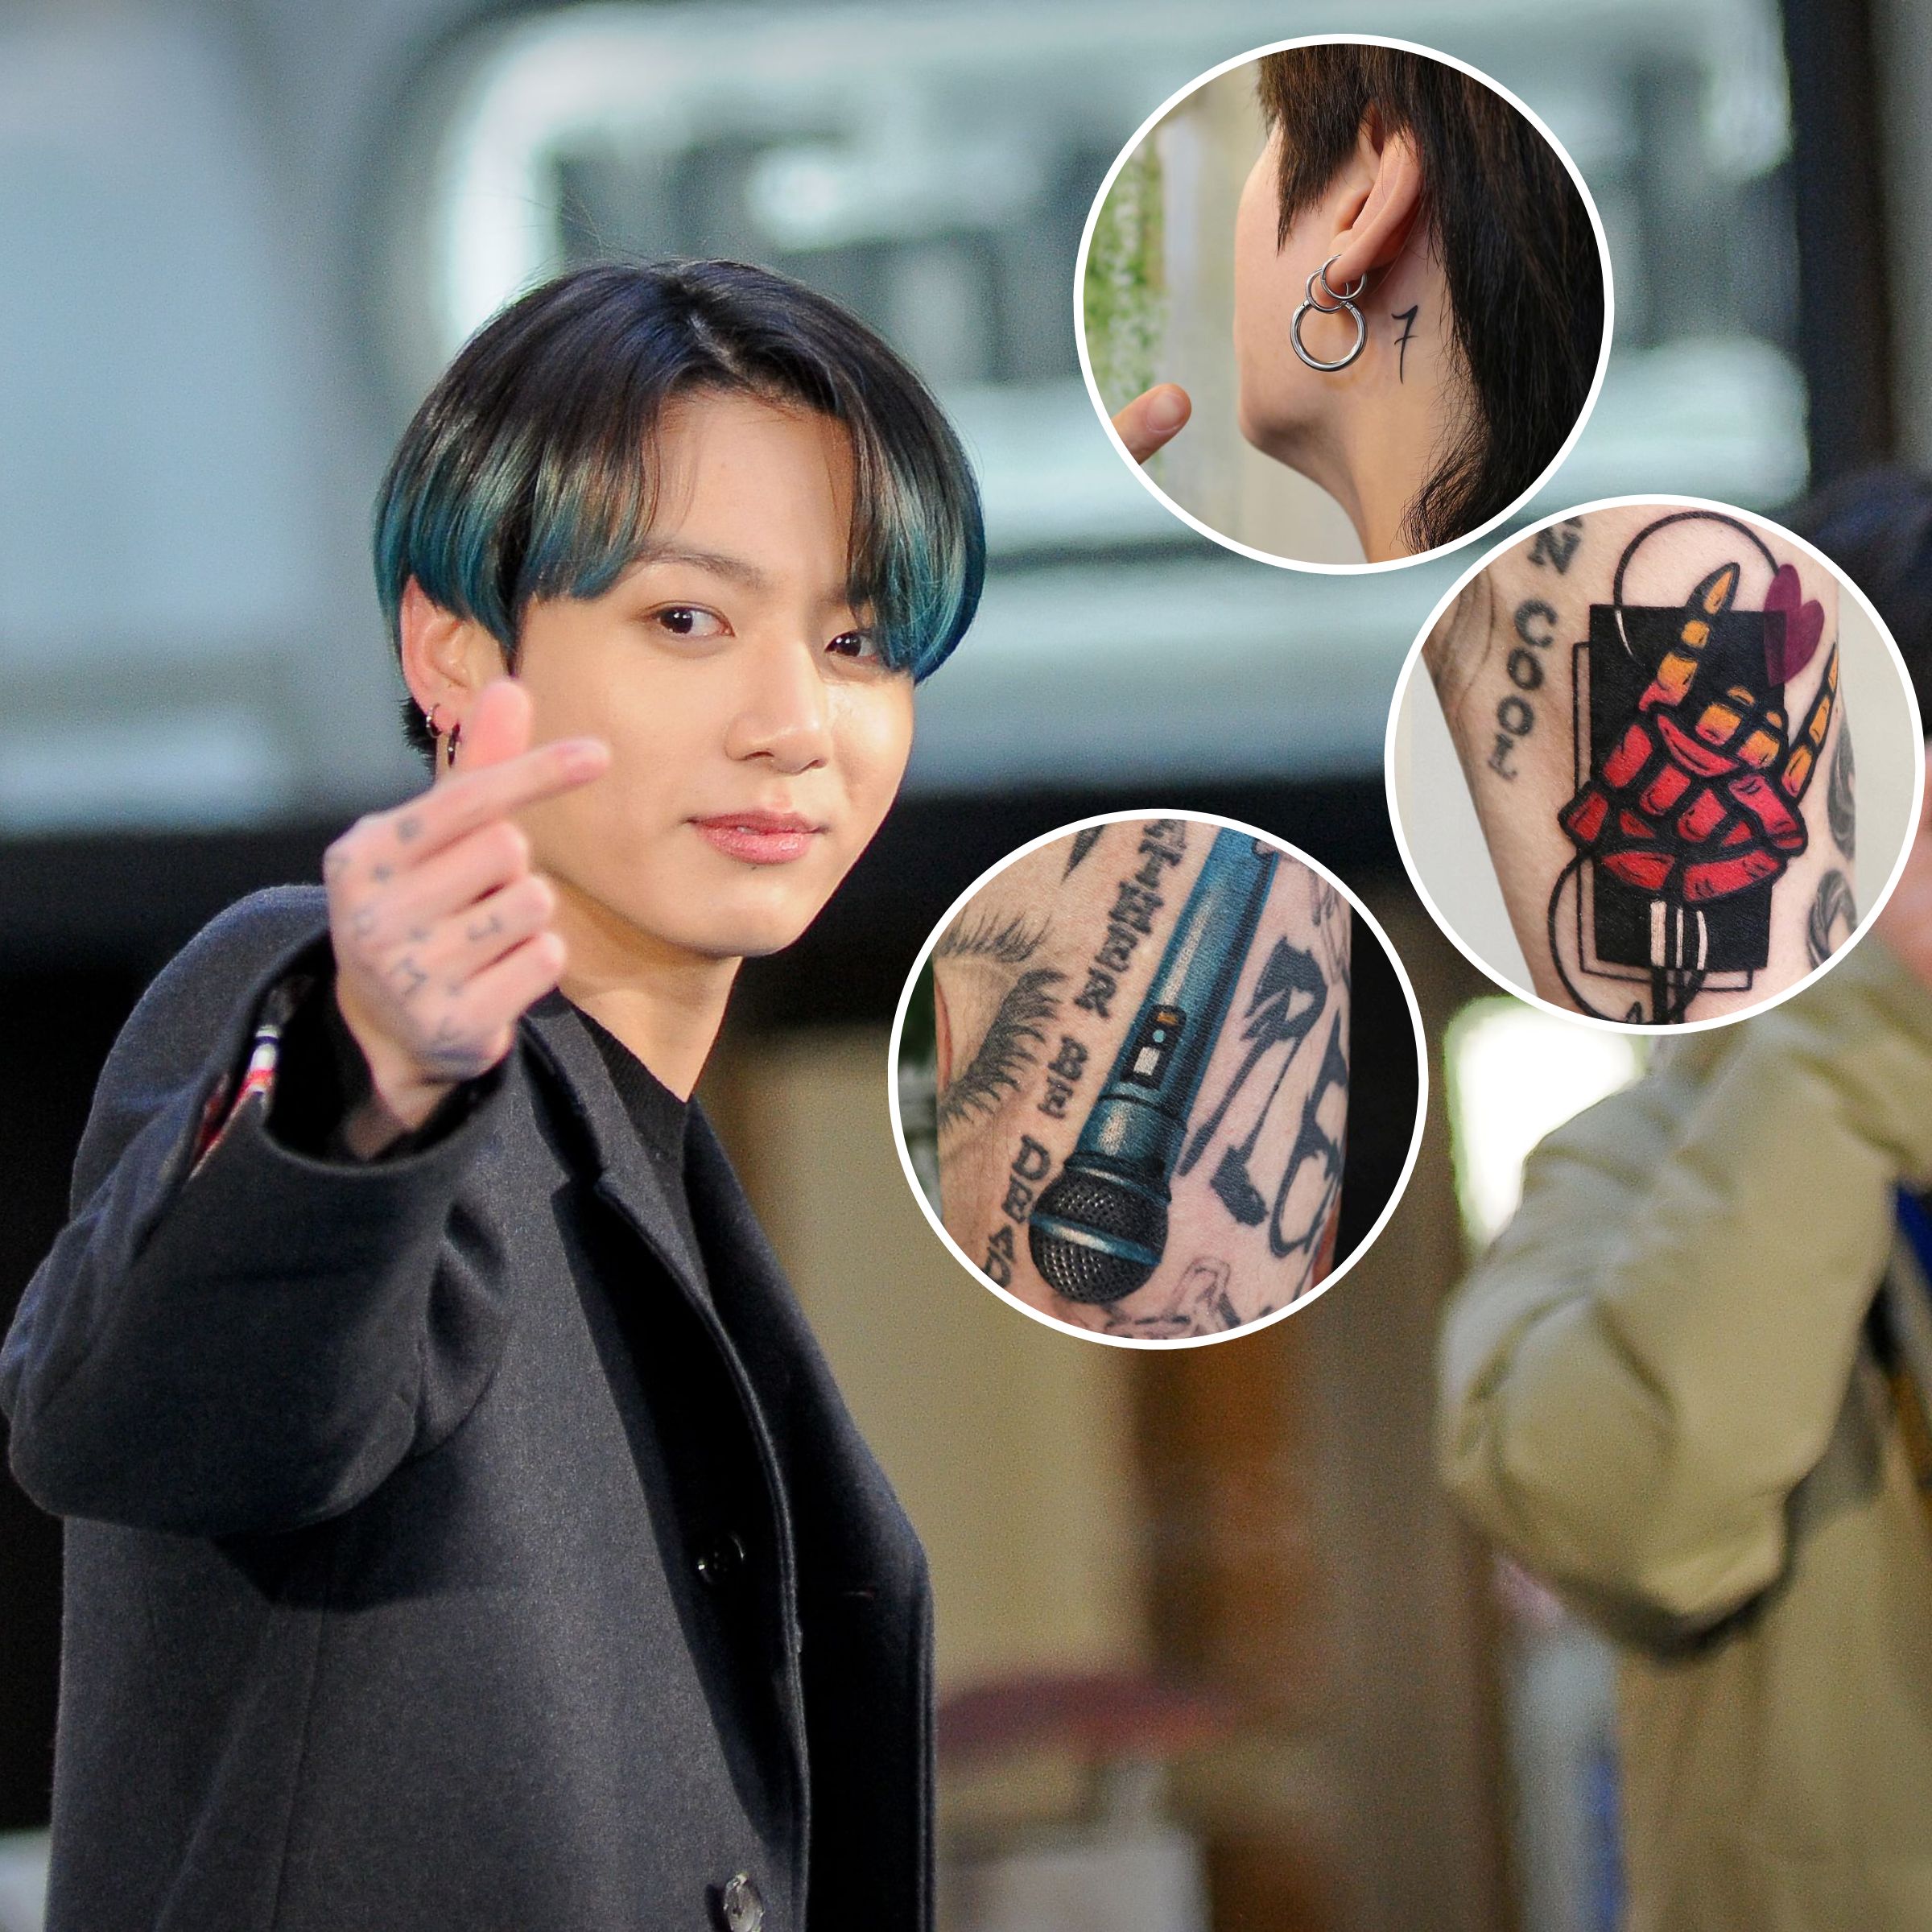 Eye tattoo to Arm clock BTS Jungkook tattoo breakdown and meanings  explored